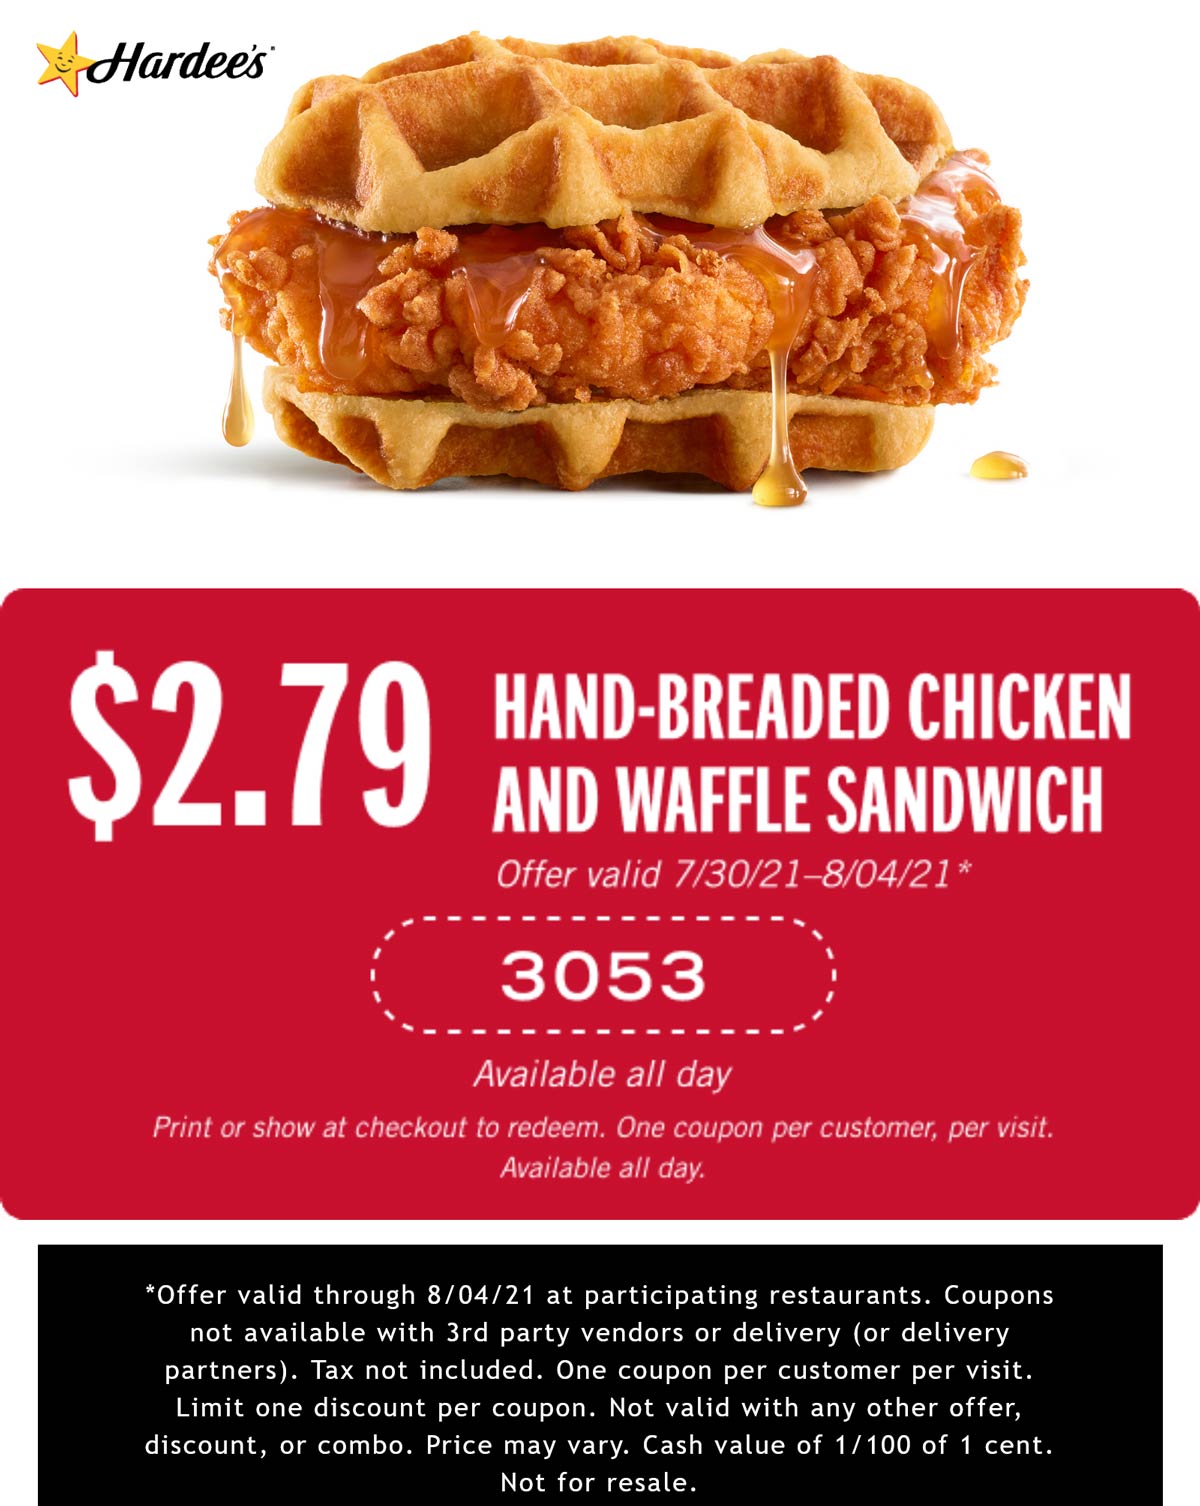 Hardees restaurants Coupon  Chicken + waffle sandwich for $2.79 at Hardees #hardees 